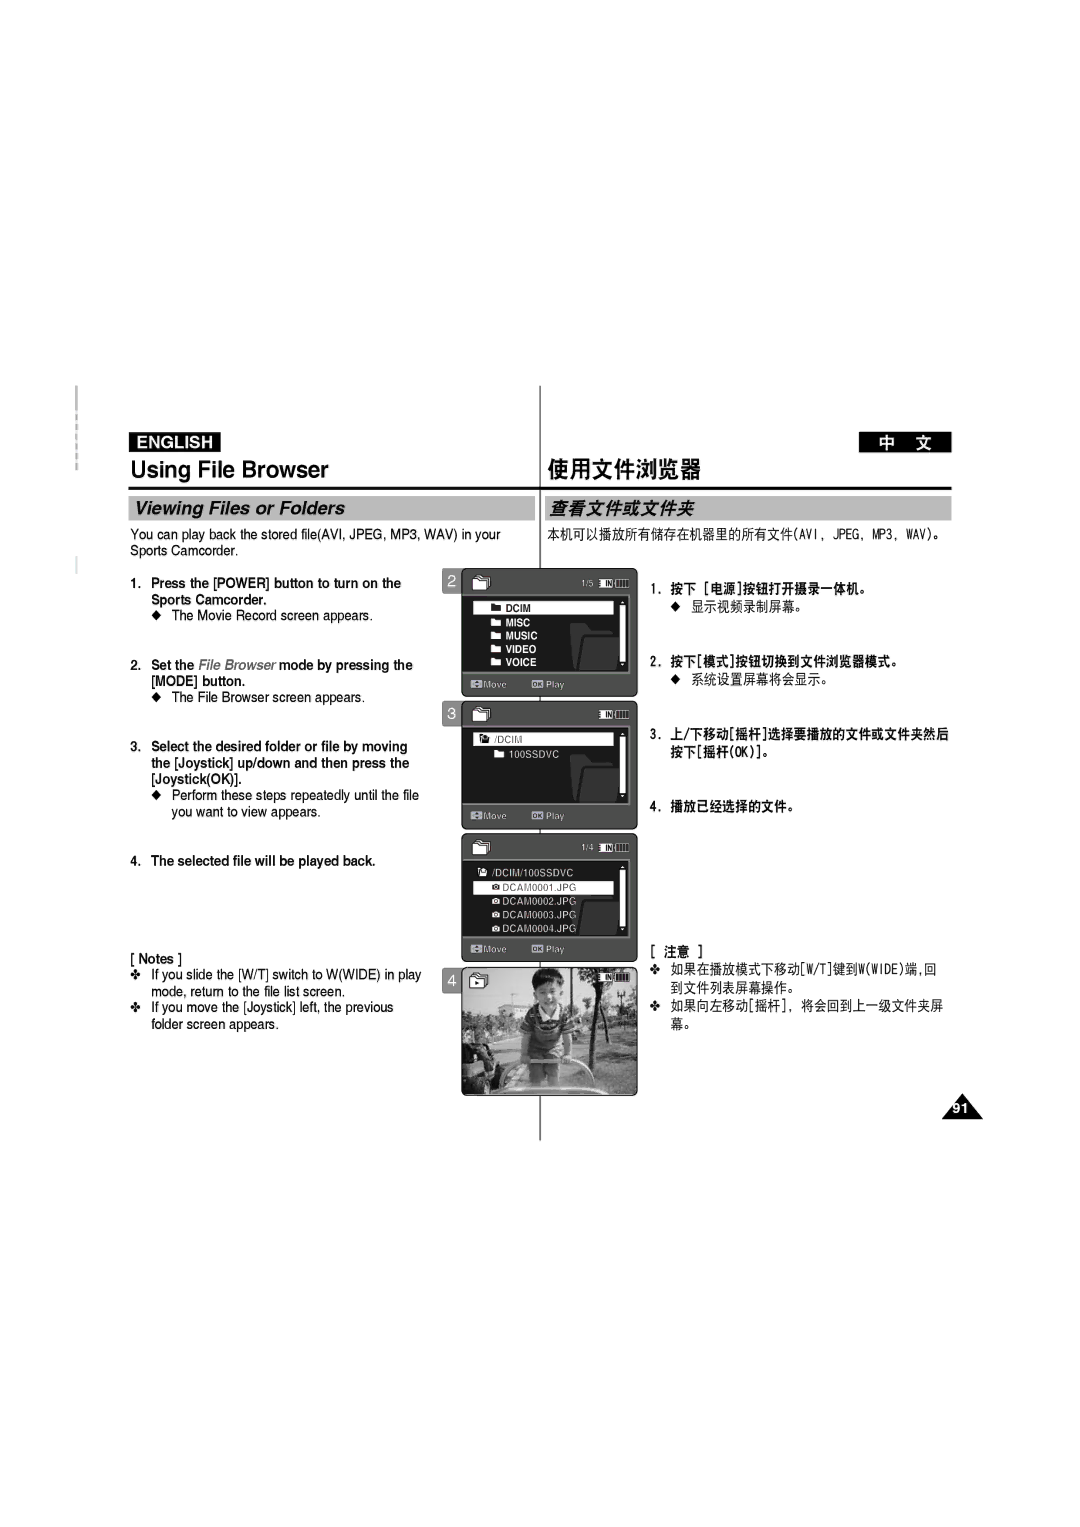 Samsung VP-X220L/XEF, VP-X210L/XEF, VP-X210L/XET manual Using File Browser, 使用文件浏览器, Viewing Files or Folders, 查看文件或文件夹 